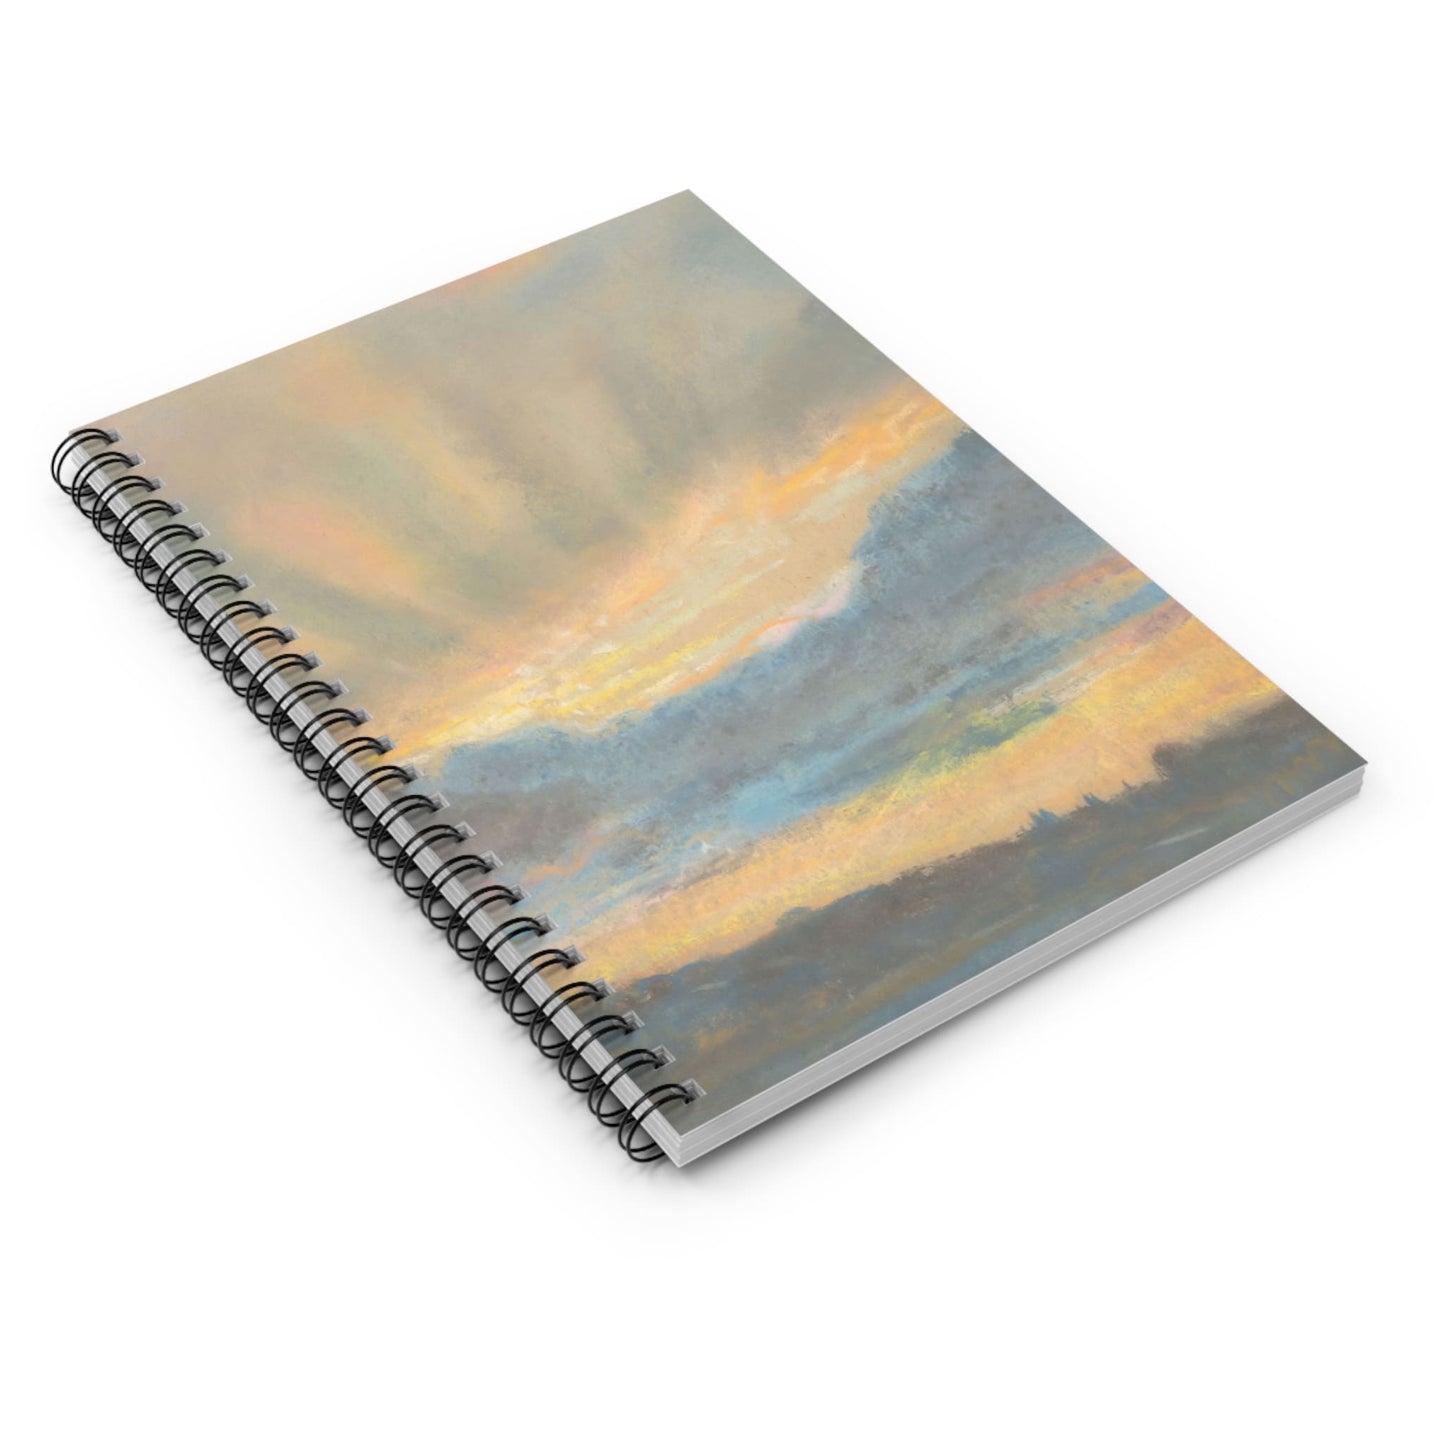 Sun in the Clouds Spiral Notebook Laying Flat on White Surface